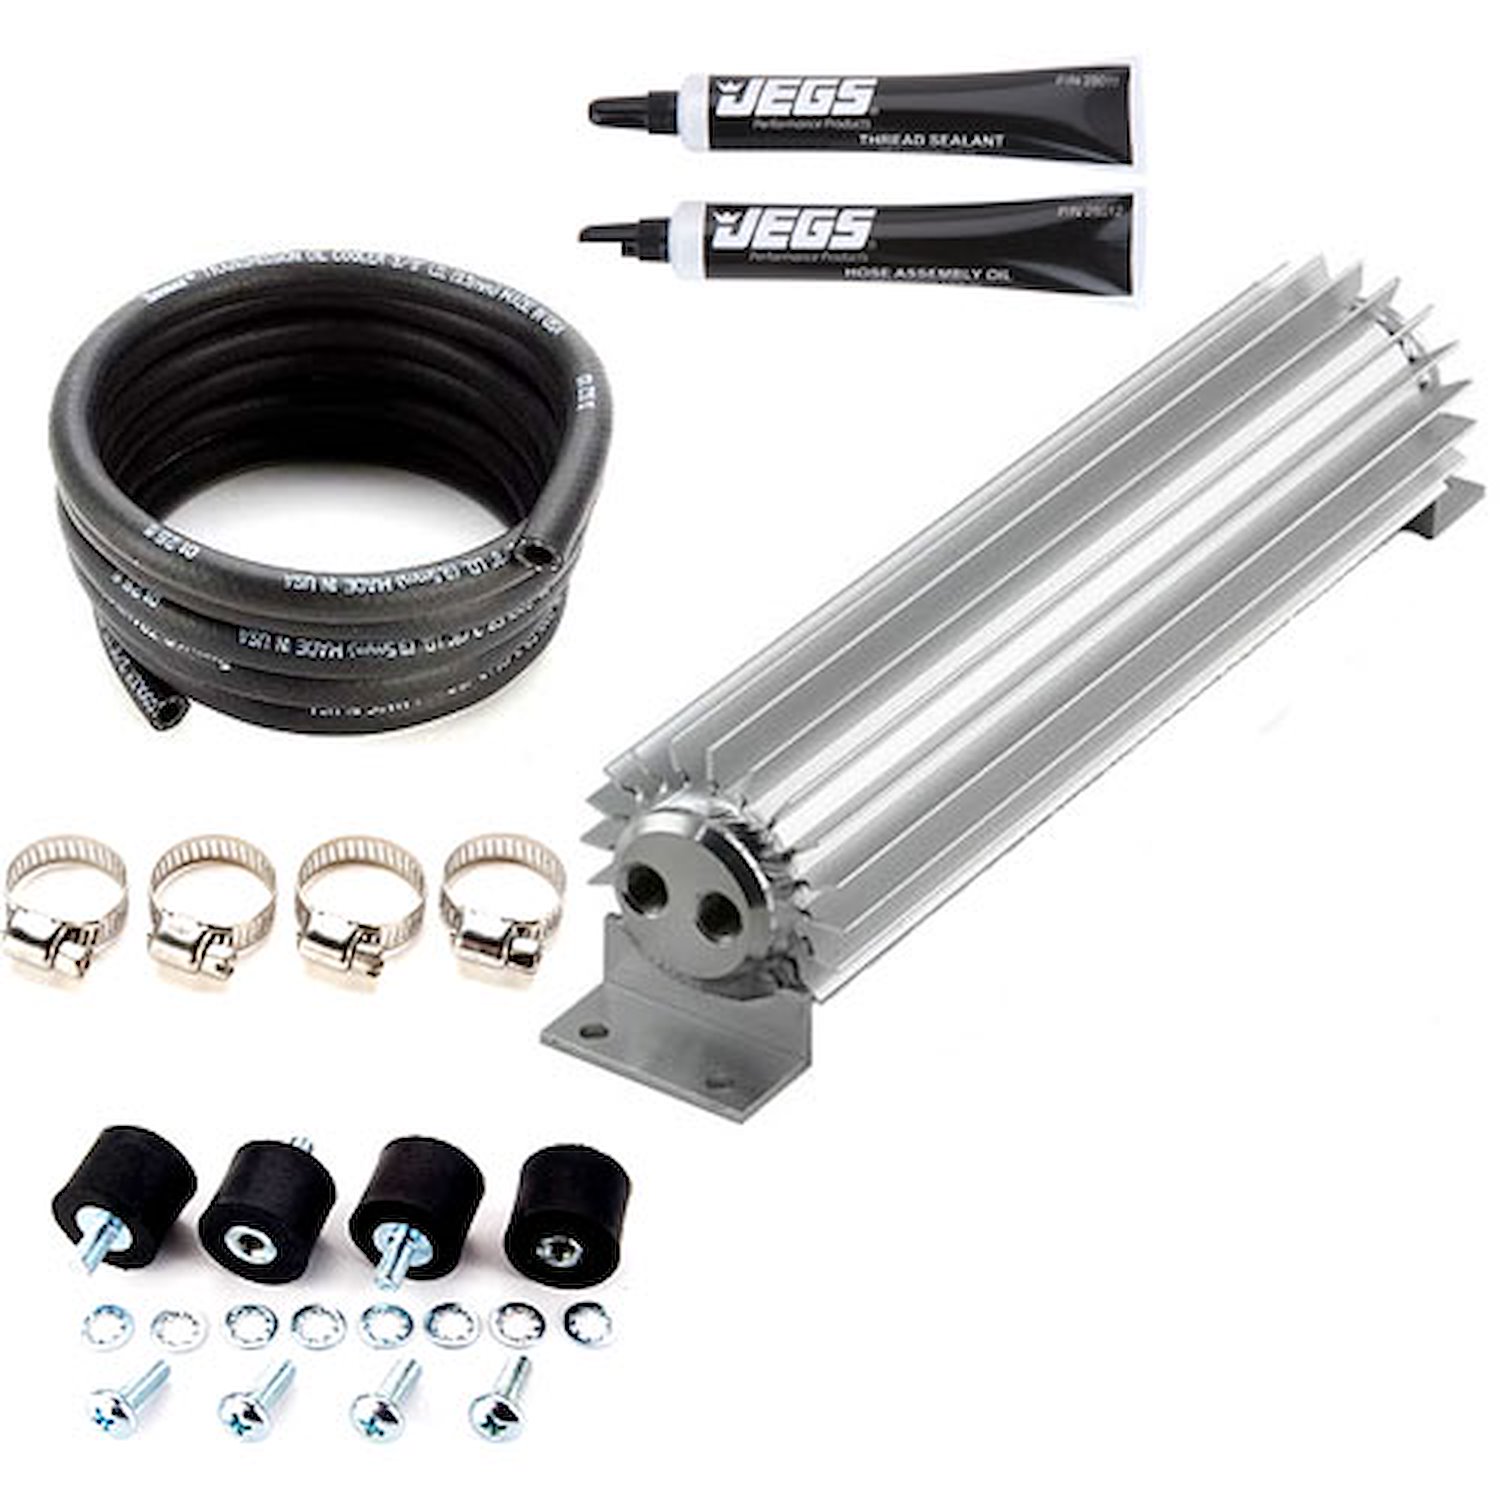 Dual Pass Transmission Oil Cooler Kit Includes: Speedmaster Dual Pass Transmission Oil Cooler With Fittings